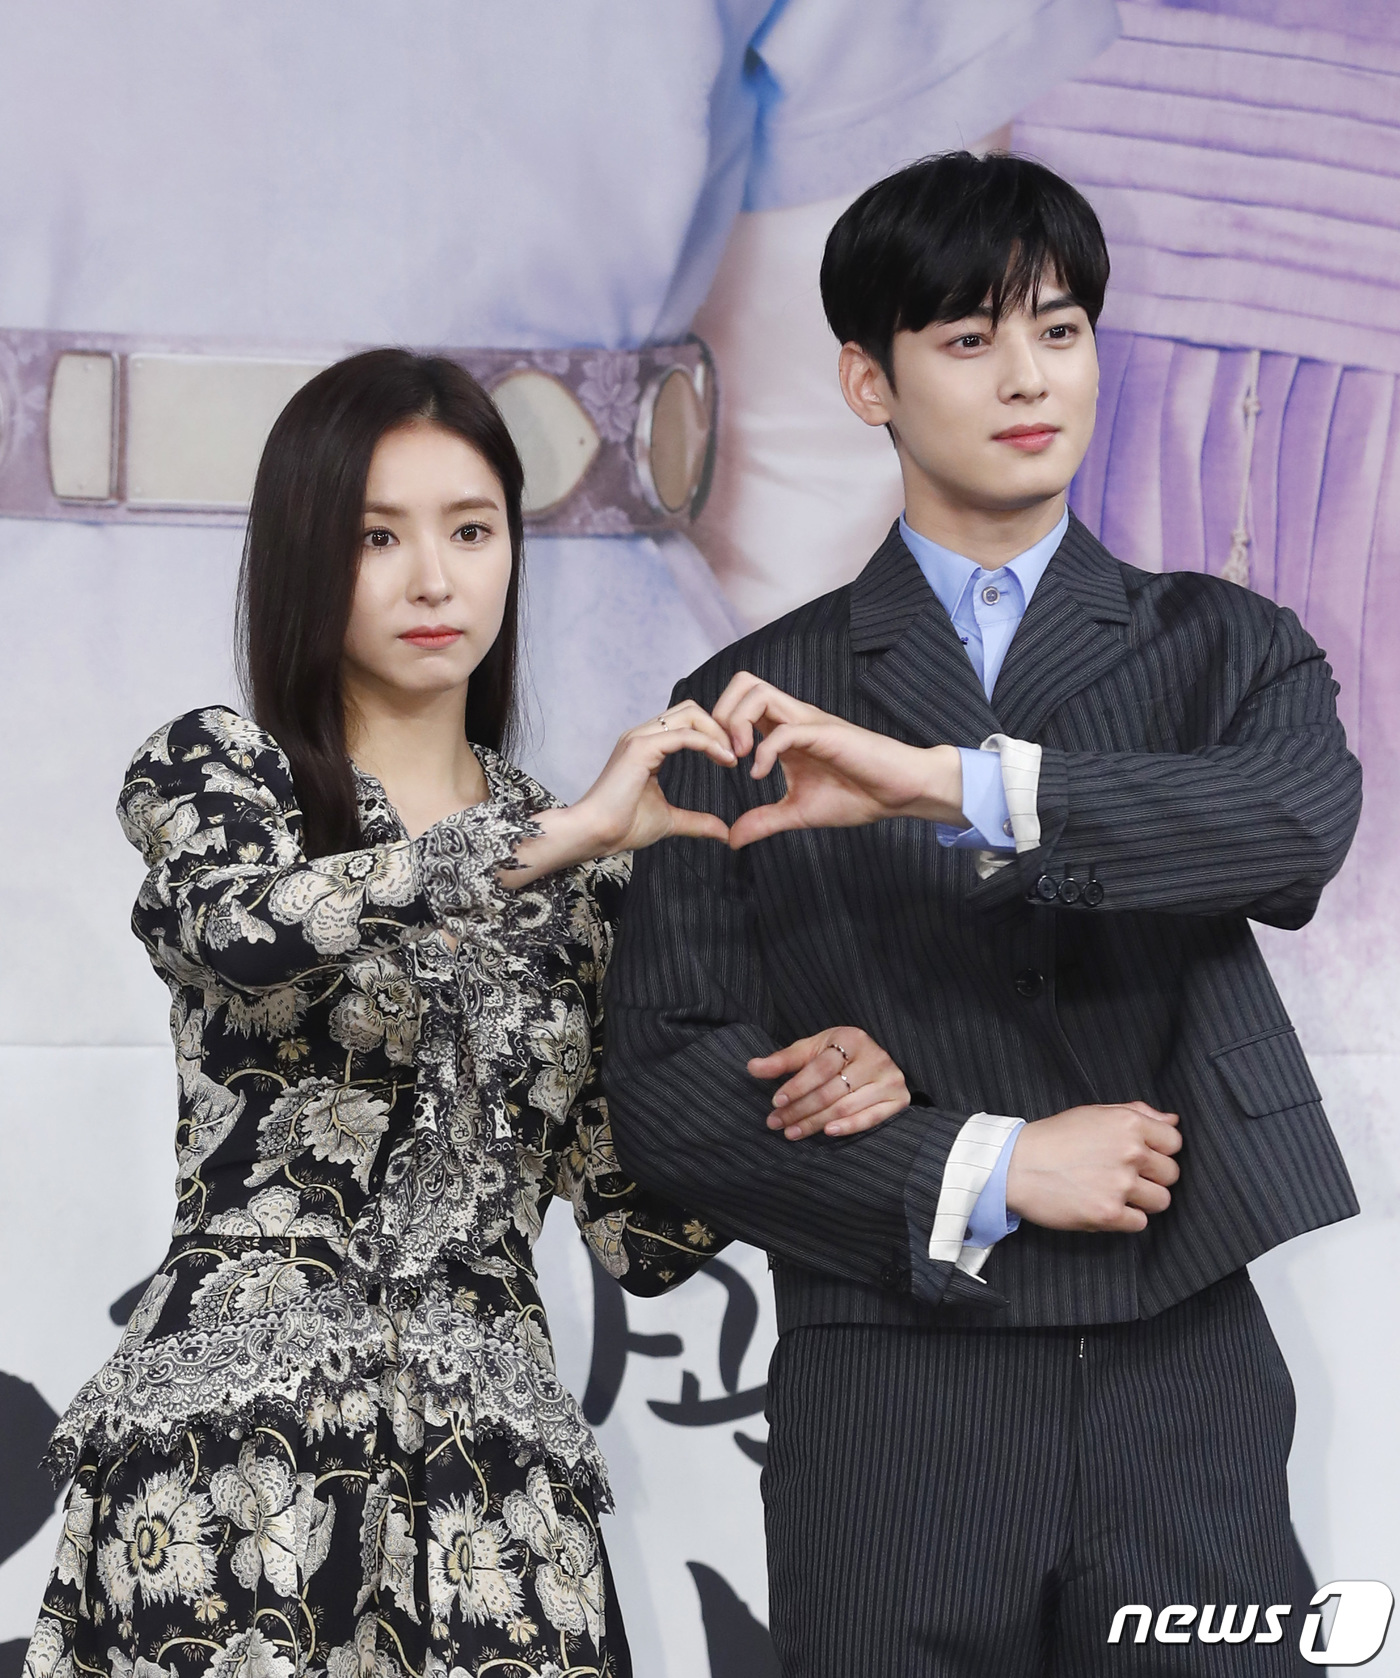 Seoul=) = Shin Se-kyung and Jung Eun-woo, the face genius, met as romance dramas.MBCs anticipated Na Hae-ryung will be a romance between Shin Se-kyung and Jung Eun-woo, who met as visual men and women.On the afternoon of the 17th, MBCs new tree drama Na Hae-ryung (playplaywright Kim Ho-soo/director Kang Il-soo Han Hyun-hee) was presented at the Golden Mouse Hall of MBCs new building in Sangam-dong, Seoul.On this day, Kang Il-soo PD, Shin Se-kyung Cha Jung Eun-woo Park Ki-woong Lee Ji-hoon and Park Ji-hyun attended and talked about the work.Na Hae-ryung, the new cadet, is the first problematic first lady () of Joseon (Shin Se-kyung) and the full-length romance of the anti-war mother Solo Prince Irim (Jung Eun-woo).It is an MBC historical drama that will be shown in two years after The Monarch: The Master of the Mask and Reversal: The Thieves Who Stealed the People. This time, viewers will come to the subject of the subject female character The Lady.The production teams face also raises expectations.Director Kang Il-soo, who has been well received as a delicate psychological description of the person through Solomons perjury, and director Kang Il-soo, such as The Land of the Wind, Jeon Woochi and Solomons perjury, met again with Na Hae-ryung.Here, Shin Se-kyung and other rising stars appear and attract attention to what synergy they will create with the production team.Shin Se-kyung is also expected to draw the character Na Hae-ryung.The character is a man who was the only thing of men in the Joseon Dynasty, where the river was dignified and the discrimination between men and women was firm. Among them, among the officers who recorded everything by the king,It comes from the erratic imagination of .As a problematic woman of Hanyang in the 19th century, I am looking forward to seeing what character Shin Se-kyung will show Na Hae-ryung, a free soul girl.Shin Se-kyung said, I can not say that I deliberately Choices the main female character.It is not easy to do Choices with one character, so I have to Choices with various parts at the gate, he said. But the character of the script I read interestingly had a common point as a subjective female character.I prepared an external physical part to prepare this work, but in the Joseon Dynasty, I tried to think freely because it is a drama that has to draw a different aspect from the lives of women in general.I think I tried to get away from the fixed idea, he added.Jung Eun-woo, who plays Top Model in his first historical drama, is another killing point for his new employee, Na Hae-ryung.Last year, JTBC My ID is Gangnam Beauty, which was recognized as a possible star, Jung Eun-woo is divided into the second-ranked Daewon Daegun Irim.Irim is a lonely mother Solo prince who lives in a palace, but he is a double life as a maehwa teacher, a popular love novelist who has heard Hanyang.Jung Eun-woo expressed his first appearance on the terrestrial and first drama Top Model.He said, I feel the same responsibility for digesting the character of Irim rather than being burdened because it is the first star of the terrestrial wave. I was nervous and nervous at the production presentation, but I feel comfortable facing it.I feel like Im shaking, but I think its the best thing to show you a good look, so I think Im shooting fun. Astro members are always cheering for hard work, and they are also cheering for coffee tea.I do not care about physical difficulties, but I want to enjoy the scene. I am trying to think happily about the scene. I am happy to meet the good seniors production team. Regarding the historical drama Top Model, he said, I was worried and nervous (I was going to appear in the historical drama). He also got a lot of advice from the director and gave a good message to the actors.Sageukton, Daejang-ri, etc., have talked to the bishop constantly.I hope you will watch it well because I am going to be a wonderful and charming friend as I go through many events later. I talked to my senior a lot, and it fits so well when I play, said Jung Eun-woo, who said, I feel like Im not just talking, but also caring for each other.I think you can learn a lot and think that you are just about to play the role of Na Hae-ryung.Shin Se-kyung said, A close friend took the previous film together and heard about his sister. He put down his greed in the first place.There are many other things that you can see through the drama, besides the external sum. I am planting it to match the characters. I also think that Jung Eun-woo is good for the character.I thought it was a friend who could instill novelty and freshness that could clean up the typical point that could be said to be this kind of historical drama. Kang Il-soo PD also showed confidence in Shin Se-kyung and Jung Eun-woo casting.I thought of Shin Se-kyung in Na Hae-ryung station from the beginning, but when I shot it, I can not think of anyone else anymore, he said.Basically, I understand the old Na Hae-ryung character. I also wear a skirt and run faster than a horse.I could not imagine another actor other than Shin Se-kyung I made a proposal first and came to me, but I came to me, he said. I am digesting well according to my situation or my acting career.Park Ki-woongs Kings acting Top Model is also noted; in this work, he plays the crown prince, Lee Jin, and says, If I play a villain, the odds are 100%.I know that the villain image is strong, and I want to play a different role and monarch role apart from that.I had a proposal for a monarch character, but there was a work that I could not do, but it was a character of an image I always wanted to do. I am glad to have a character that I dreamed of because I had the idea of ​​acting an image if this role came in.Meanwhile, Na Hae-ryung, a new employee, will be broadcasted at 8:55 pm on the day.